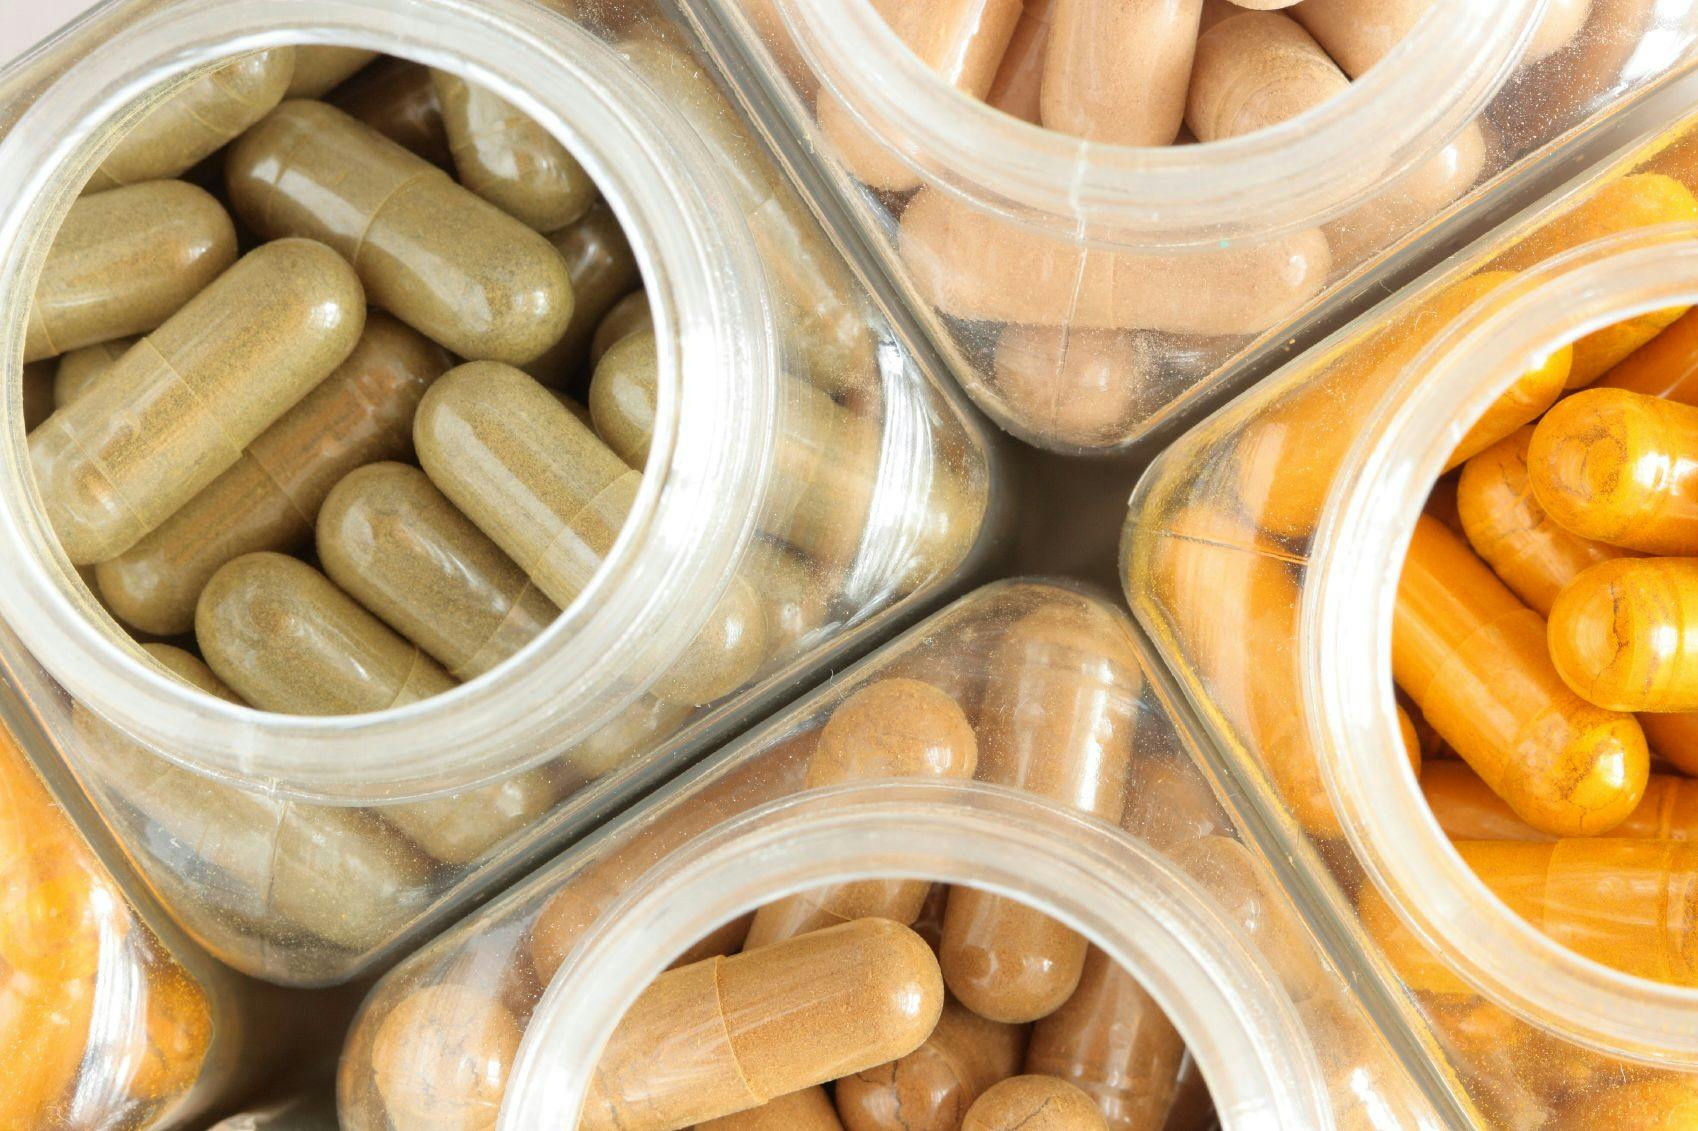 Probiotic Supplements Will Be the #1 Fastest-Growing Supplement in North America through 2021, Says Euromonitor at SupplySide West